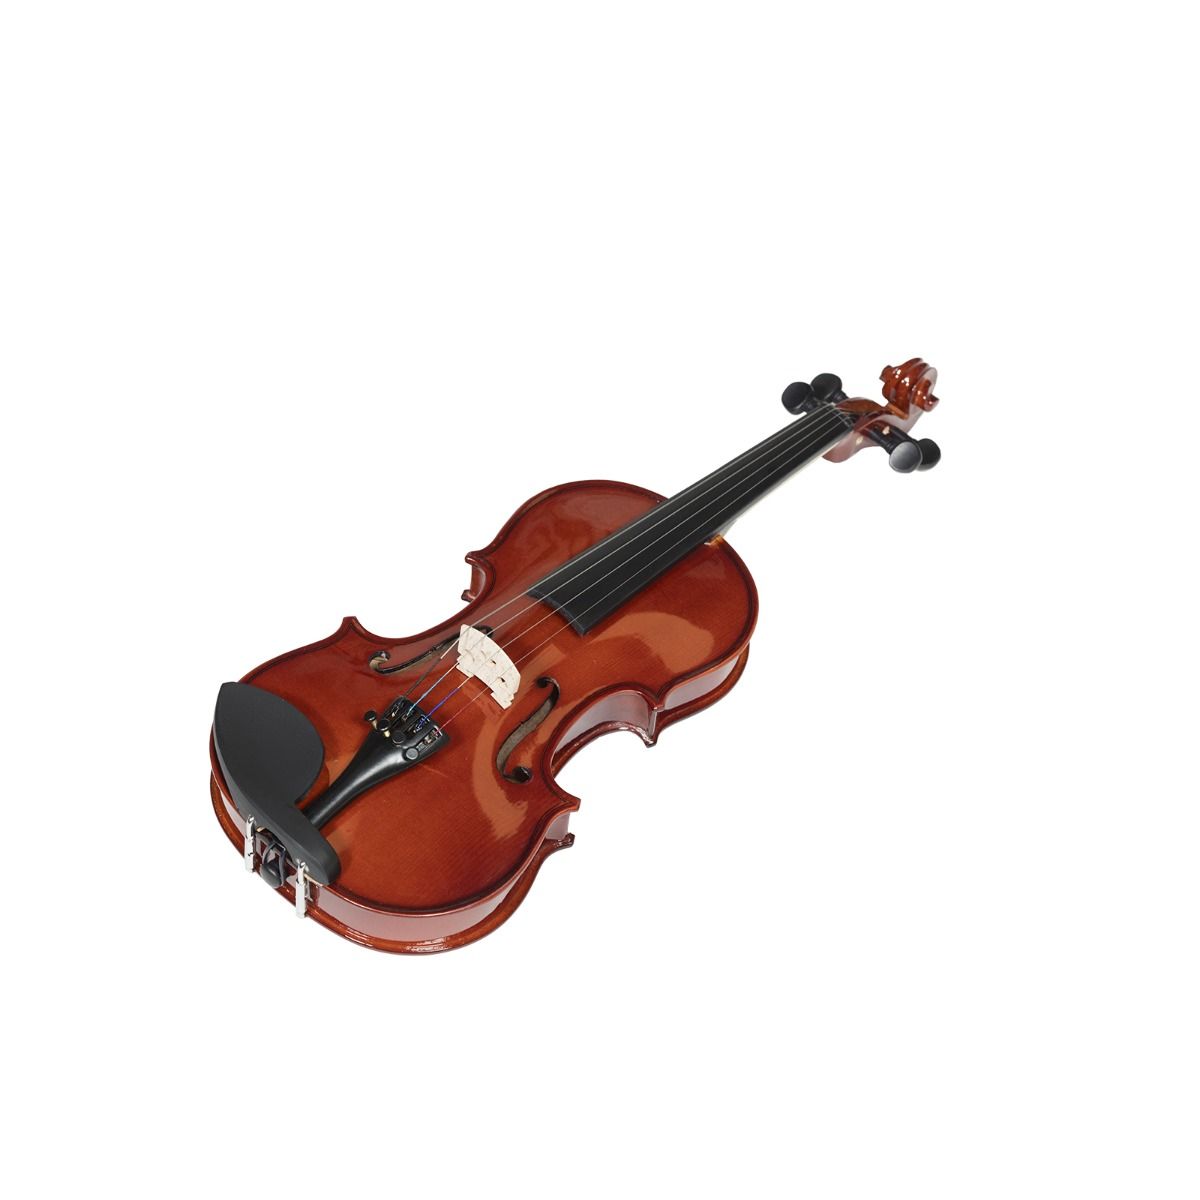 HEARTLAND 3/4 SOLID MAPLE STUDENT VIOLIN WITH DELUX CASE